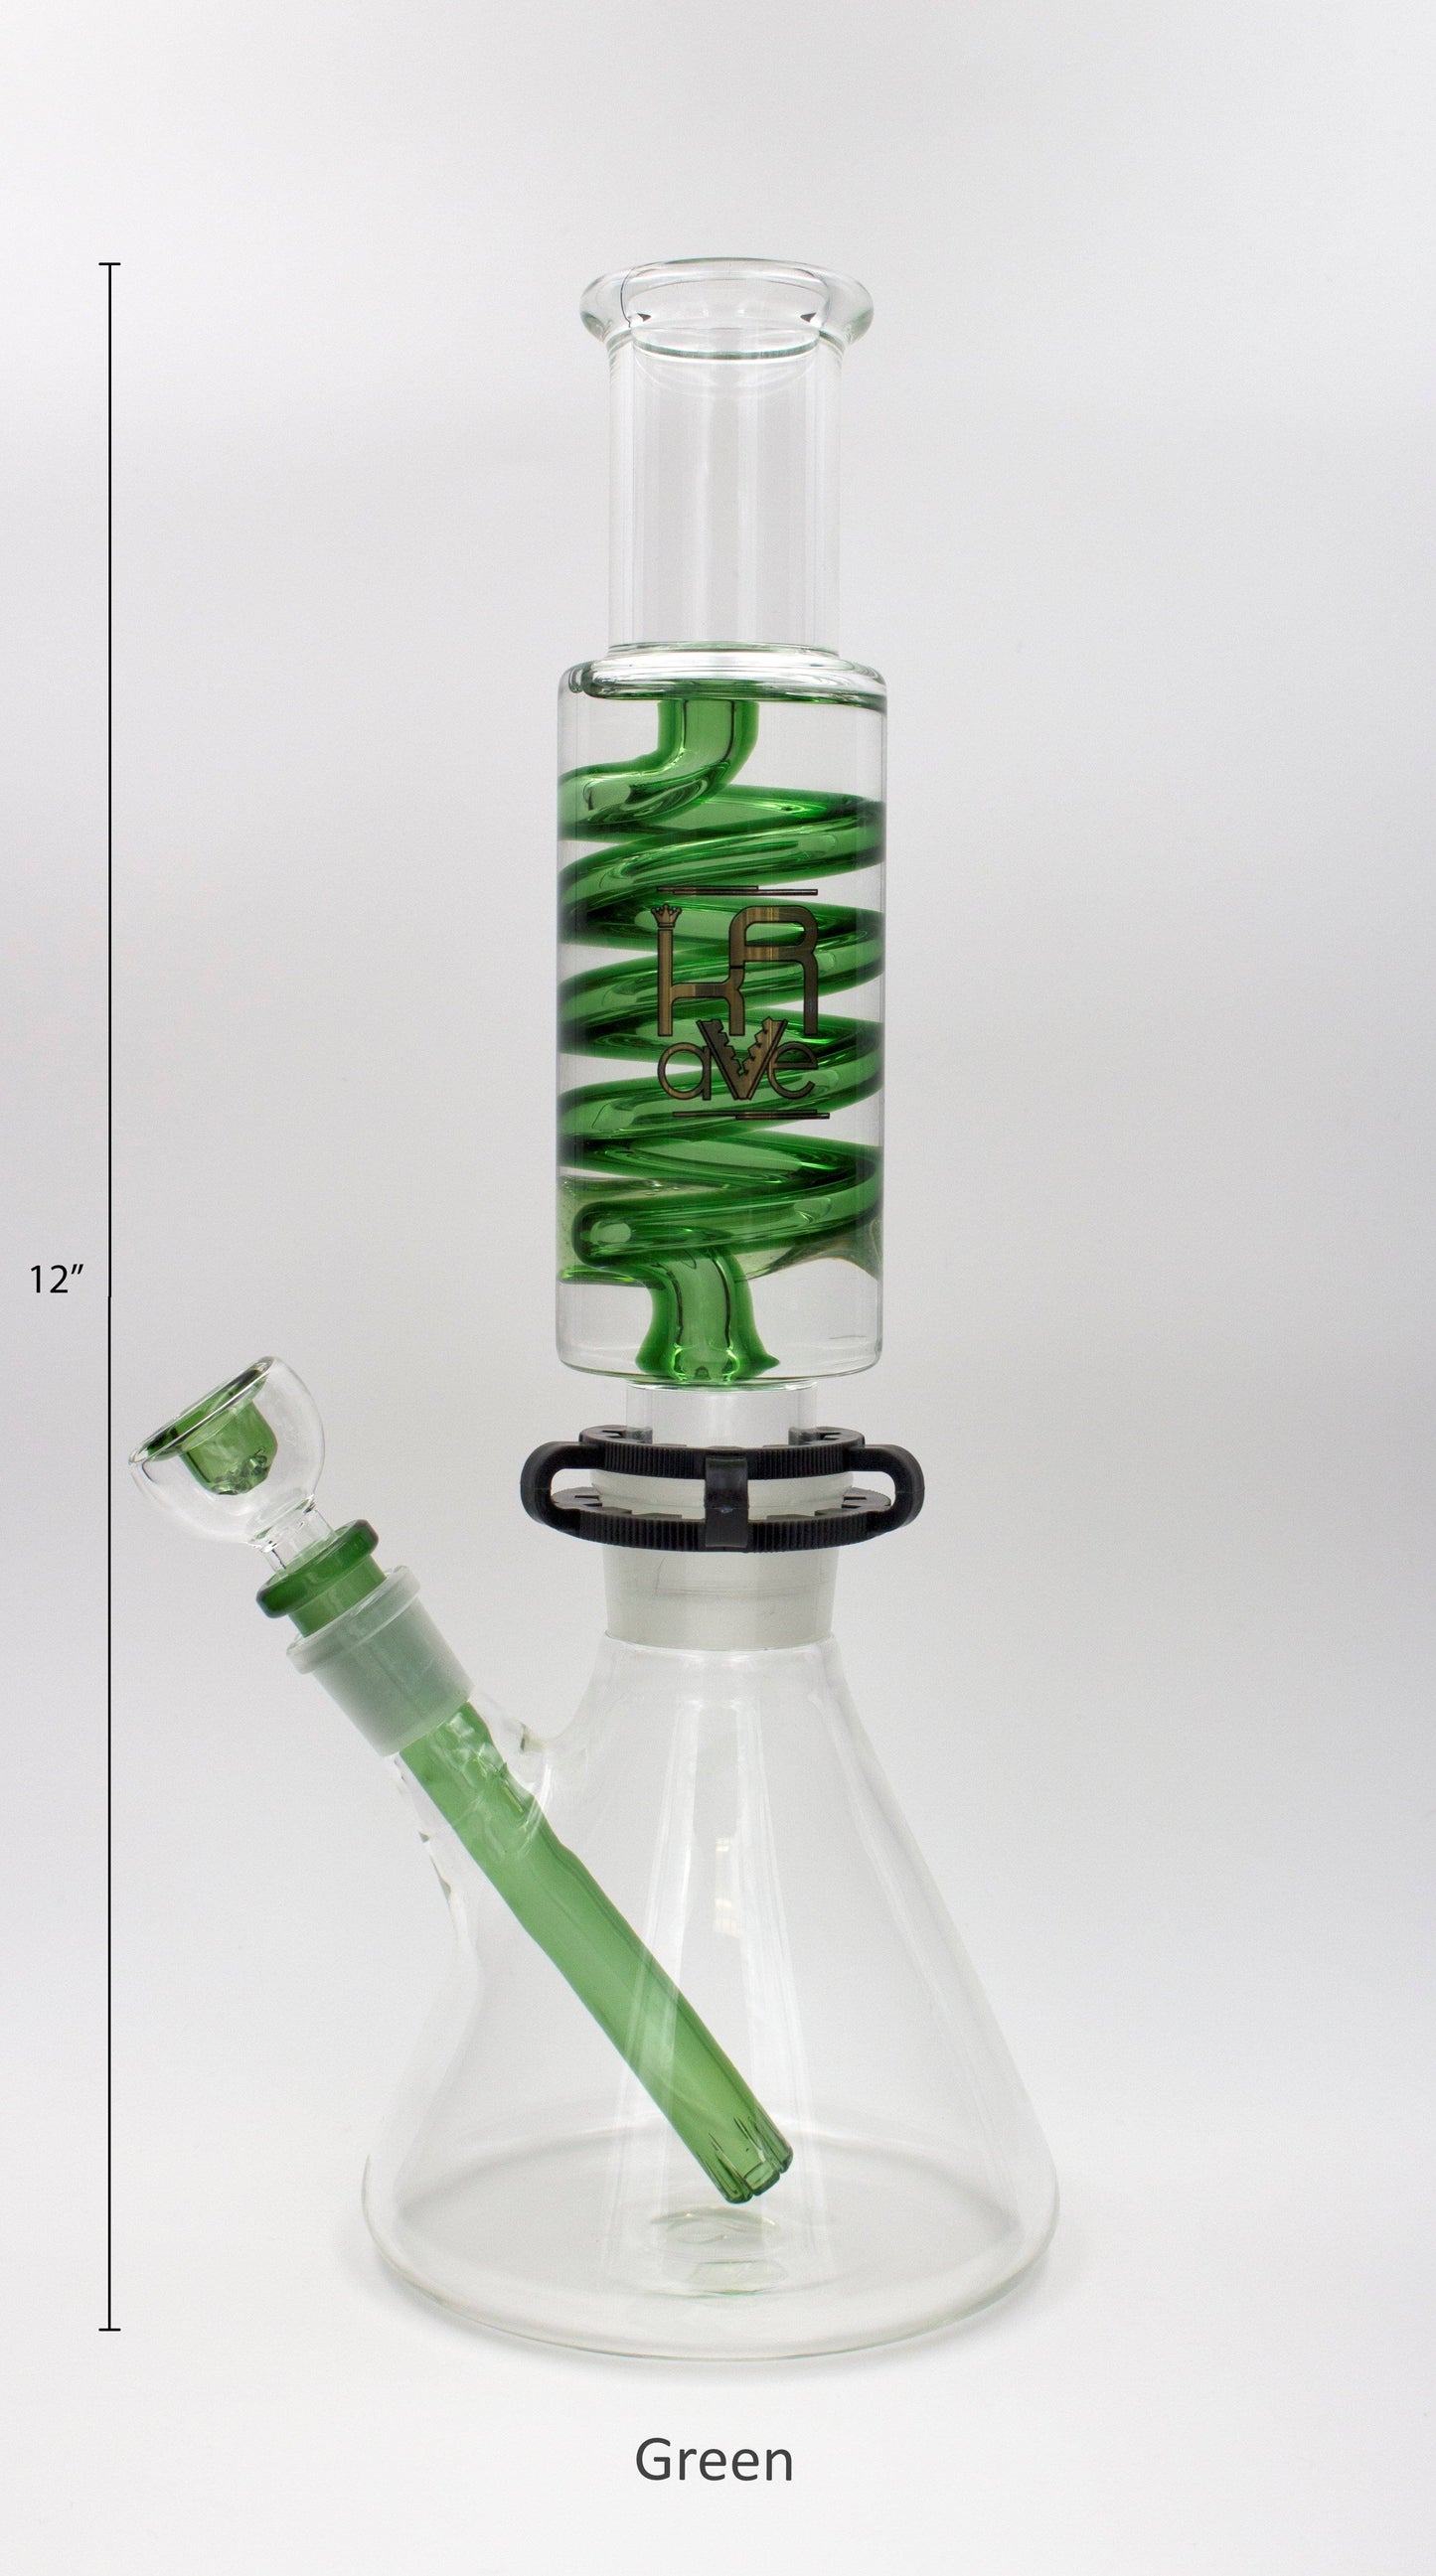 Krave Glass Laboratory Flower Power Packages 